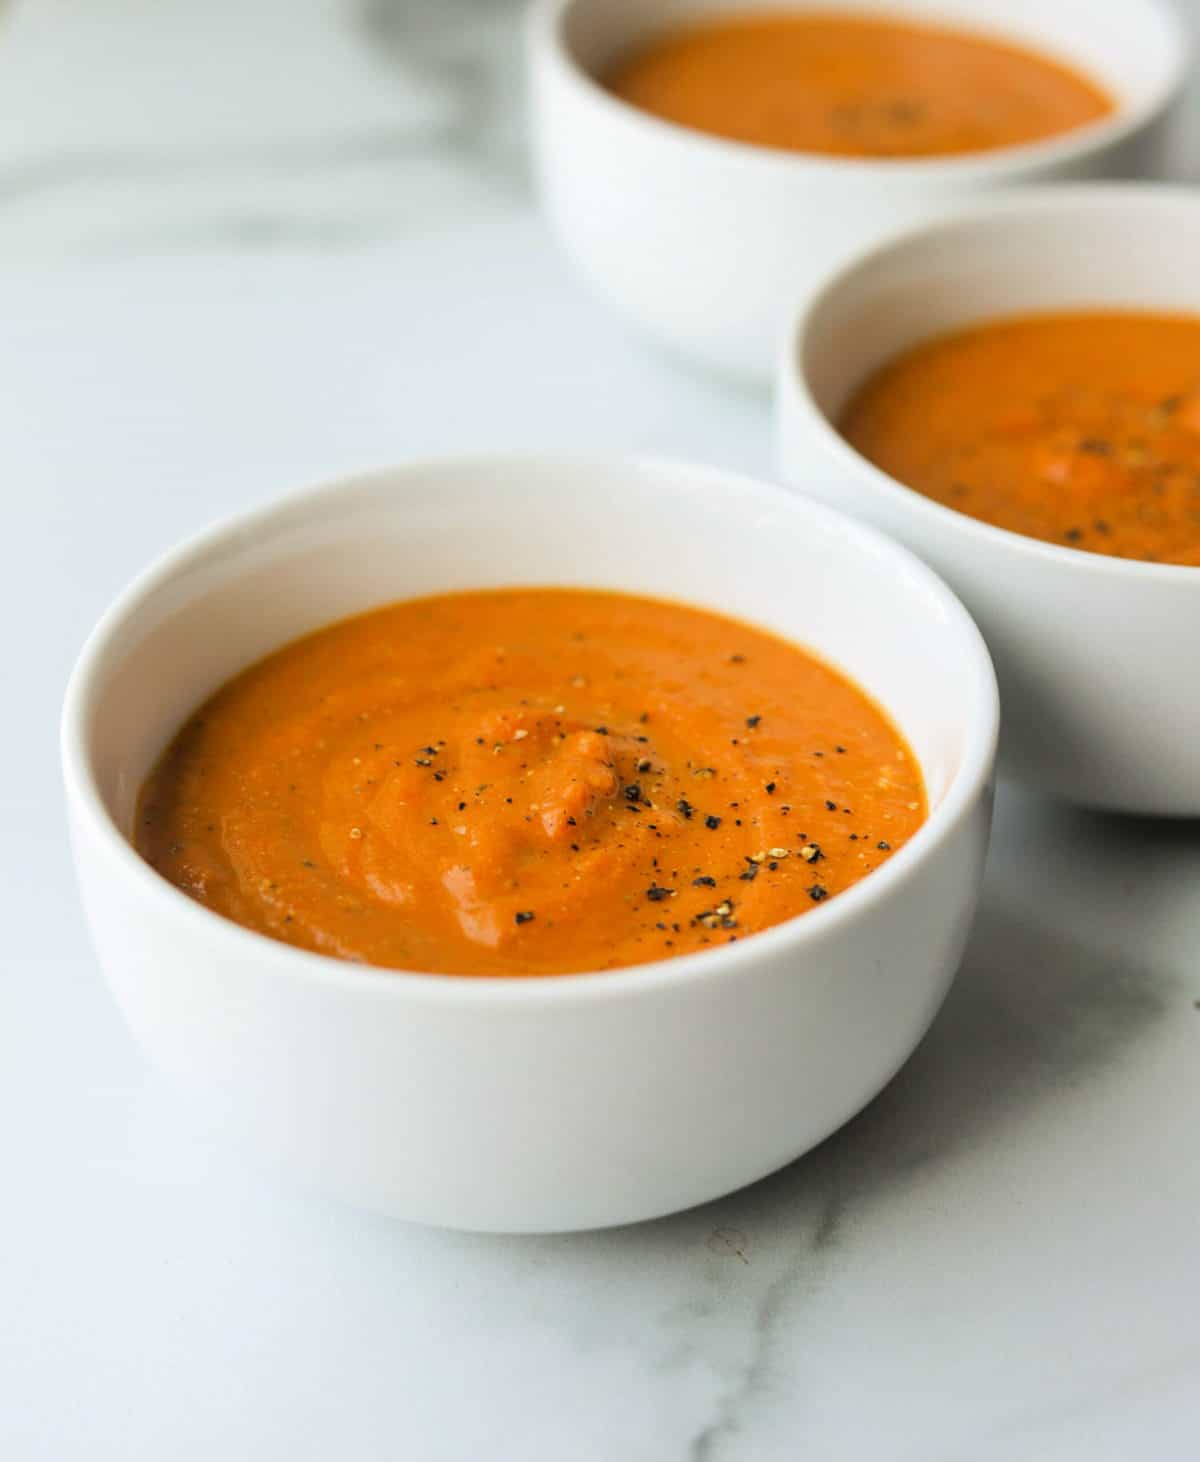 A side shot of bowls of spiced carrot soup.